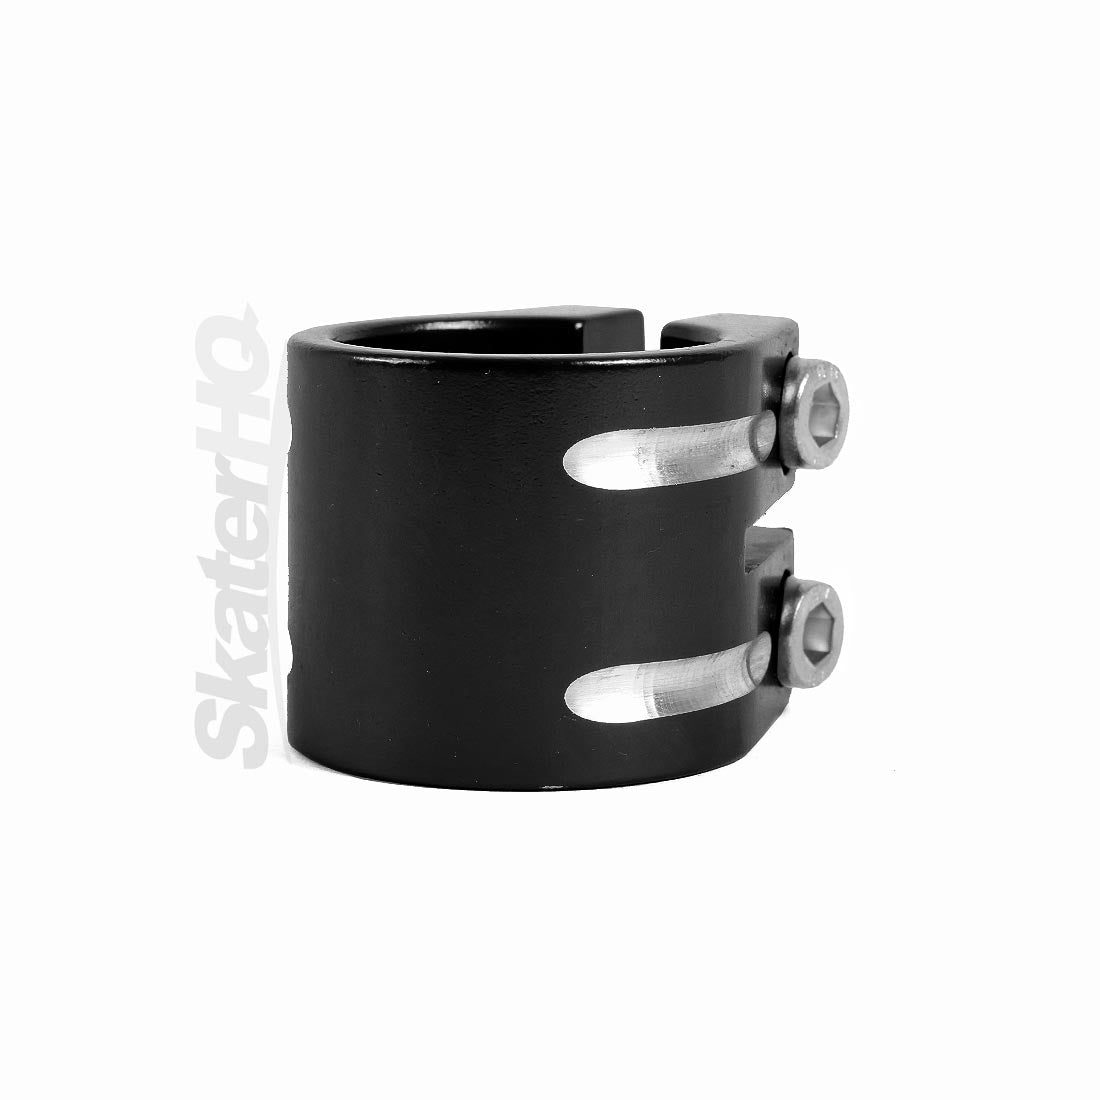 Flavor Double Clamp 31.8mm - Black Scooter Headsets and Clamps